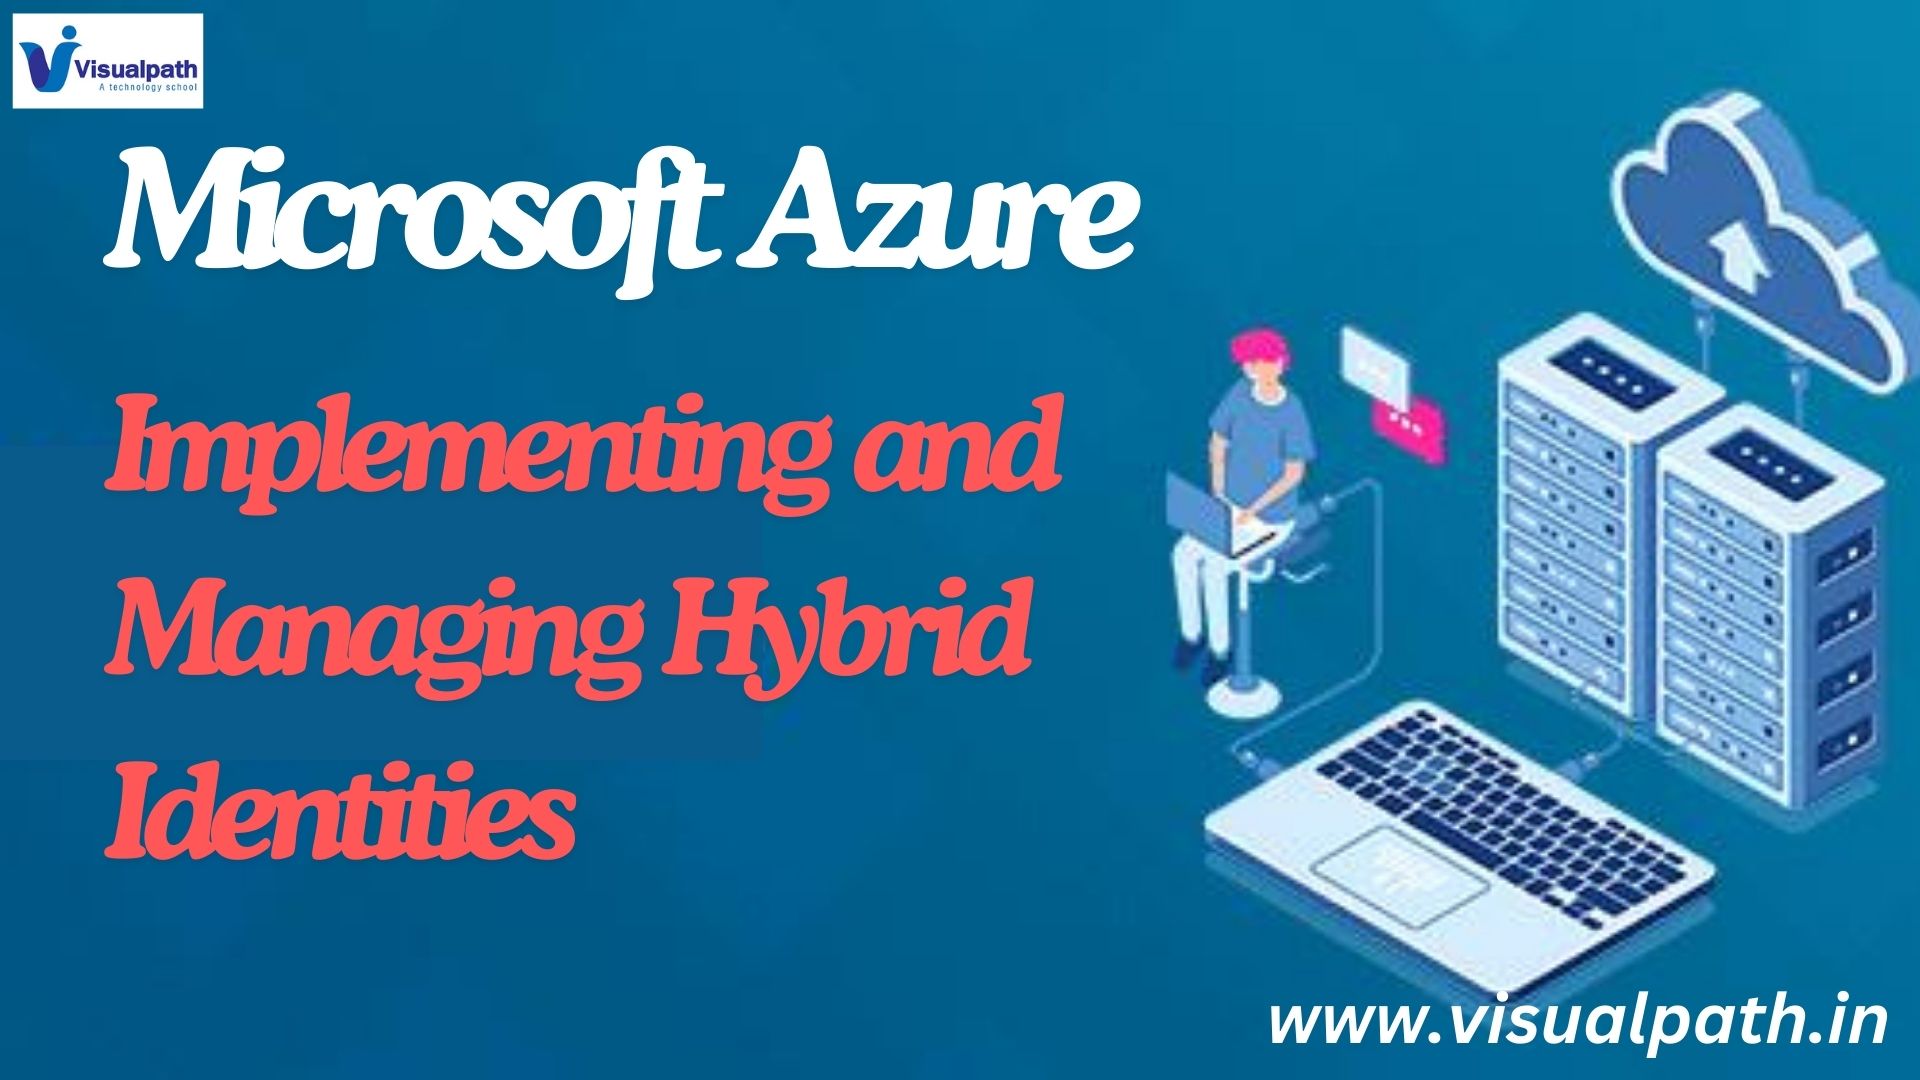 Implementing and Managing Hybrid Identities. with Microsoft Azure